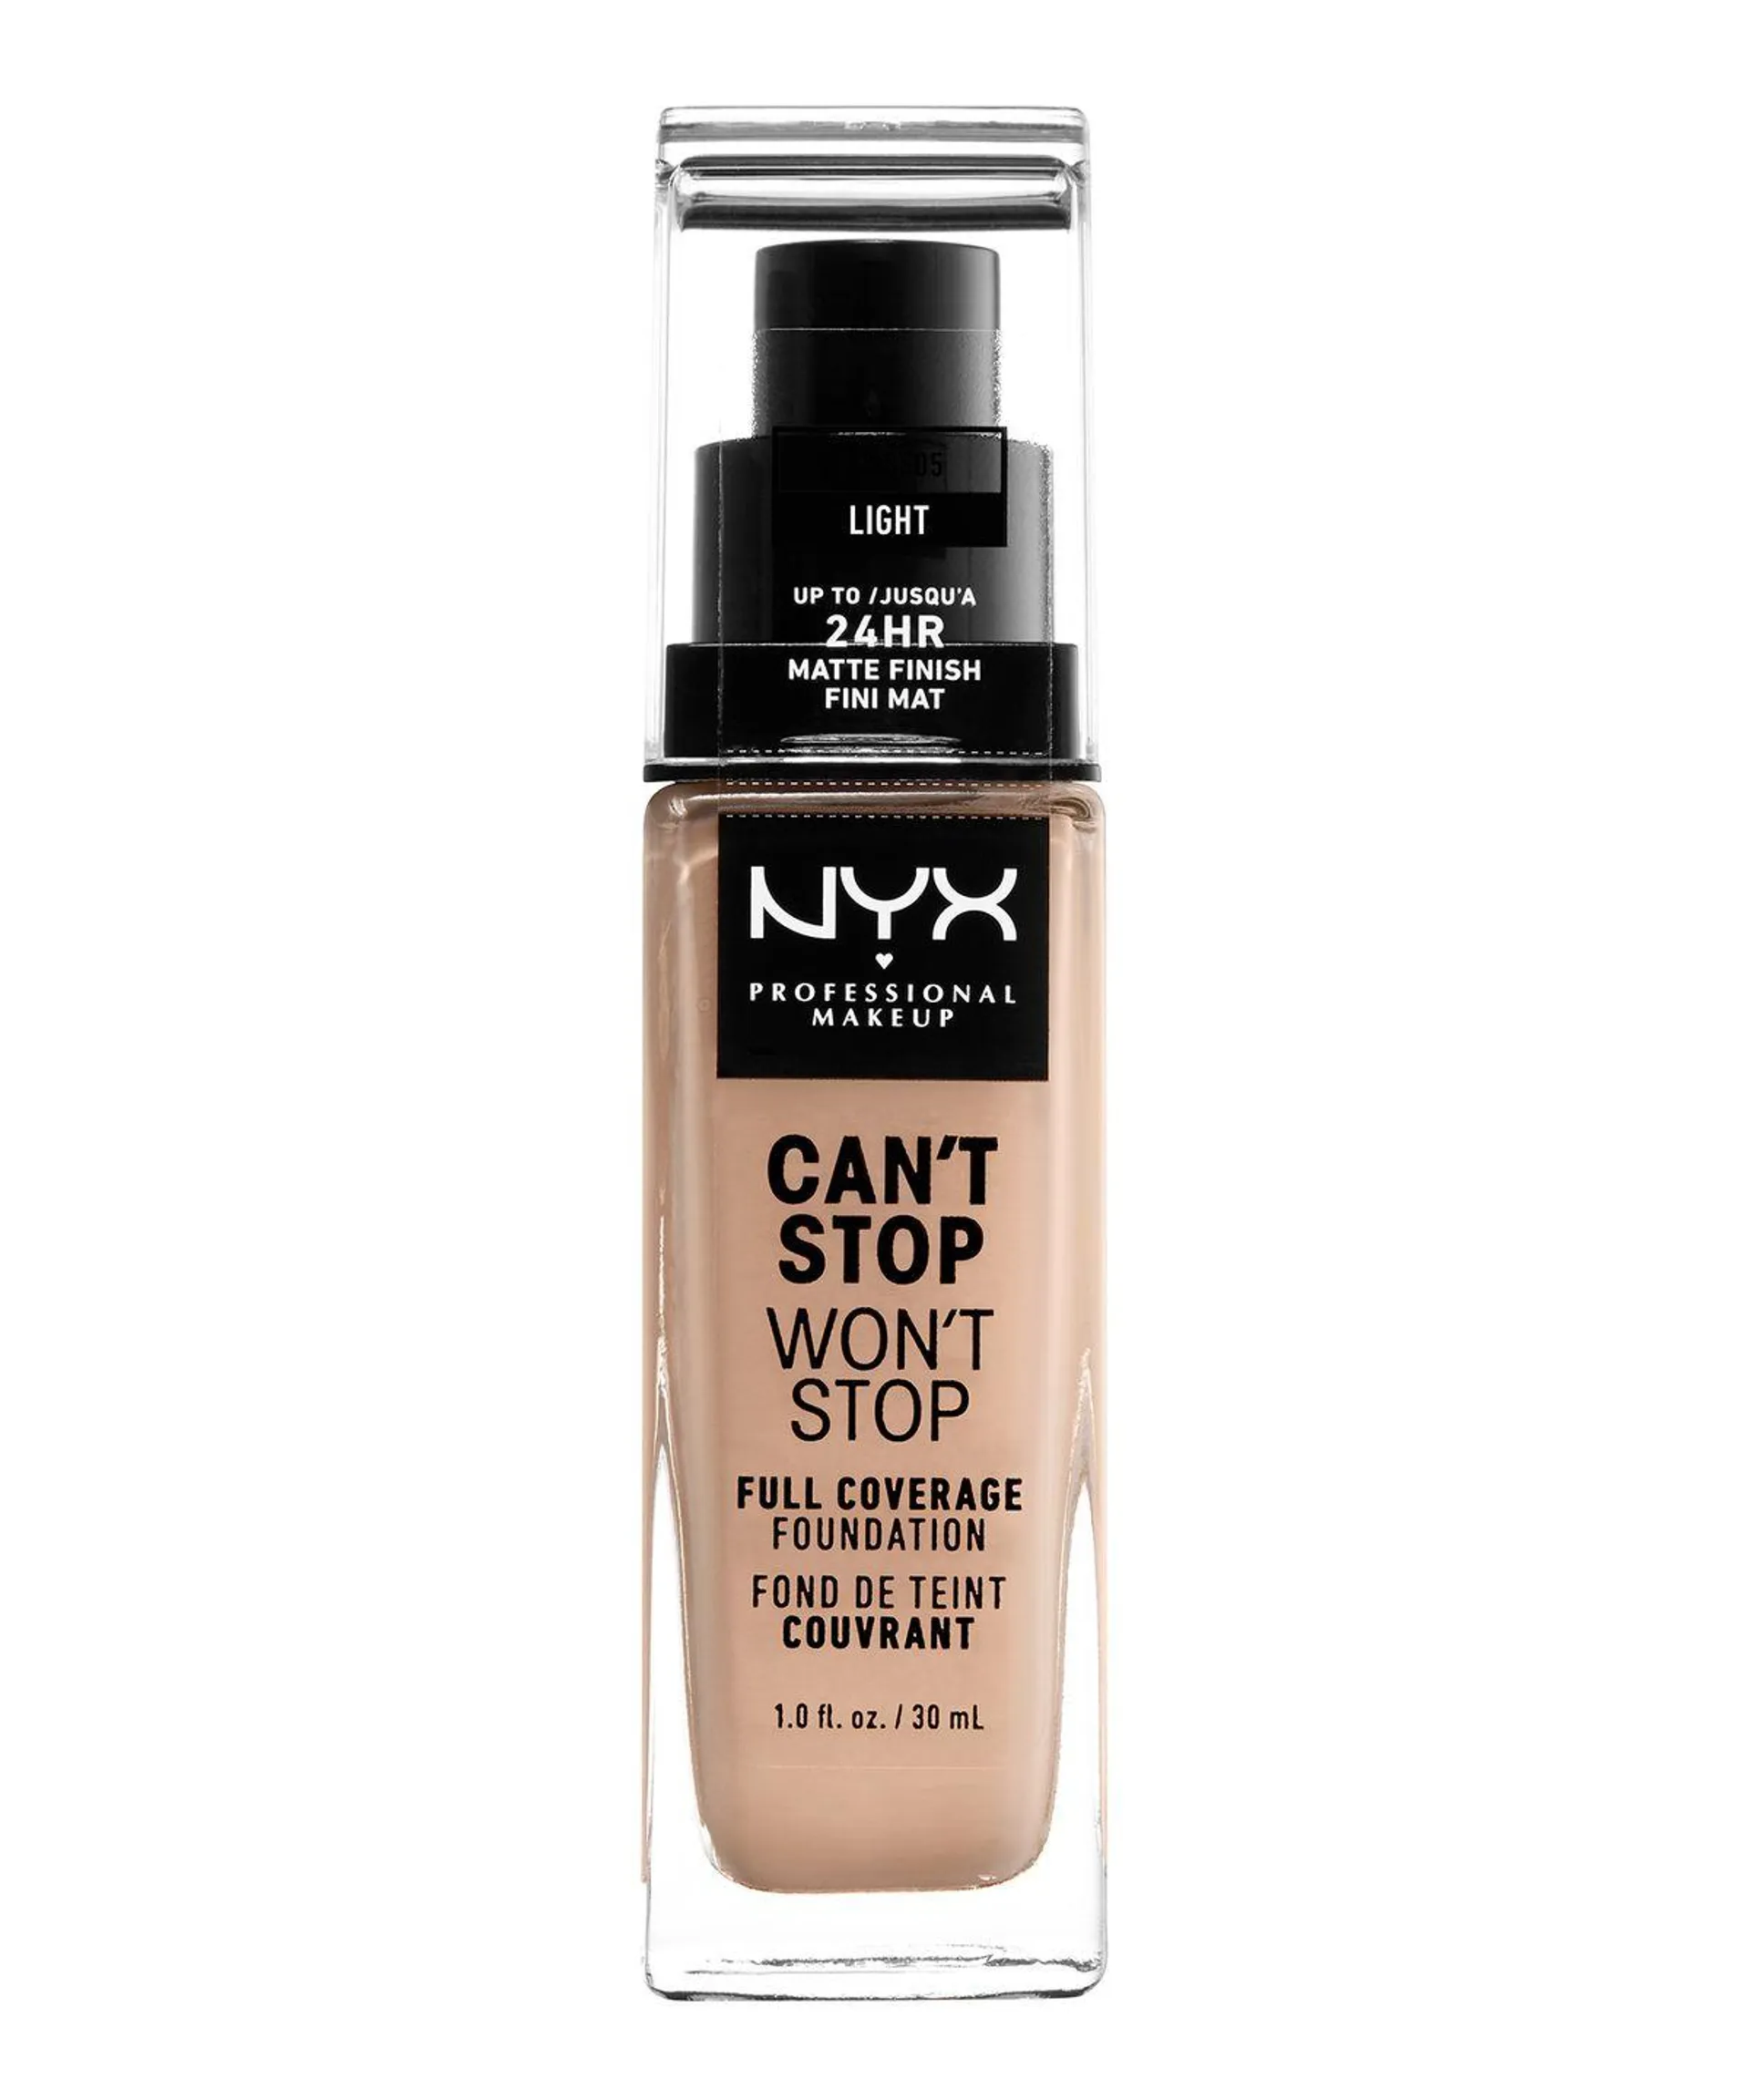 BASE DE MAQUILLAJE CAN'T STOP WON'T FOUNDATION - NYX PROFESSIONAL MAKEUP